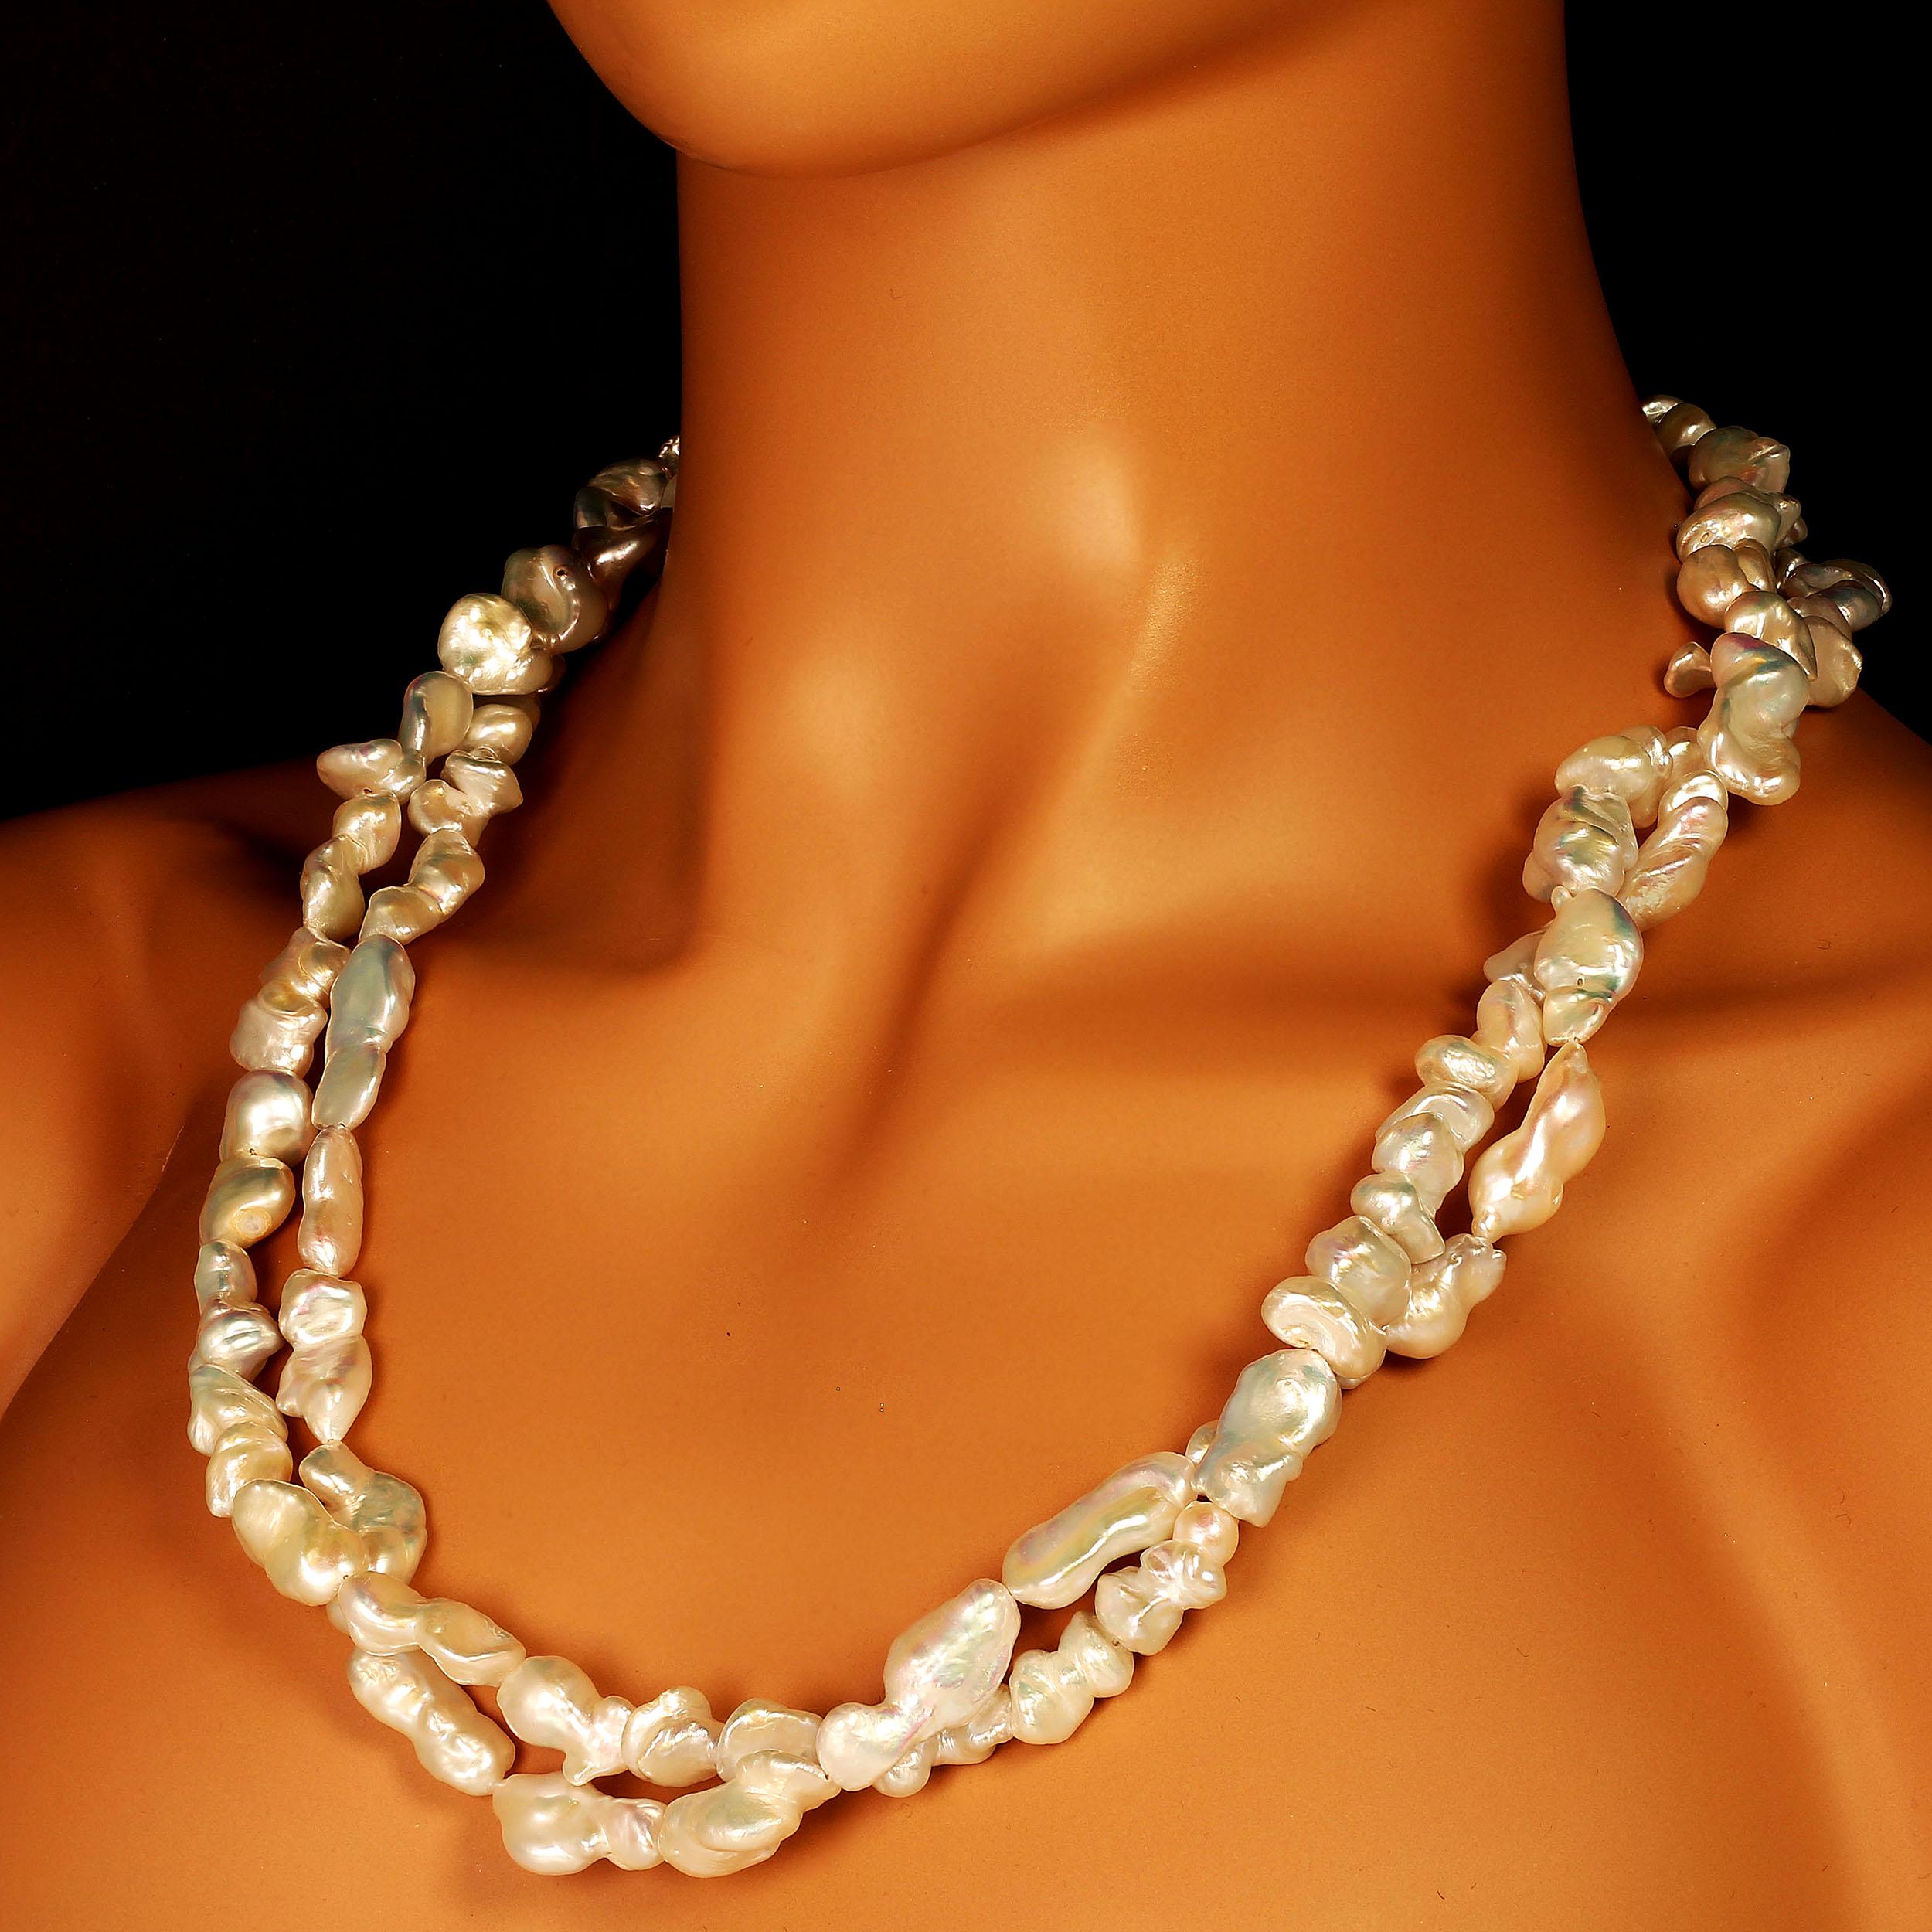 'Pearls are always appropriate'   Jackie Kennedy

Custom made necklace of Iridescent Silvery White Baroque Pearls with a Baroque Pearl Clasp. The entire necklace is 62 inches in length which makes it very versatile: You can wear it as One long